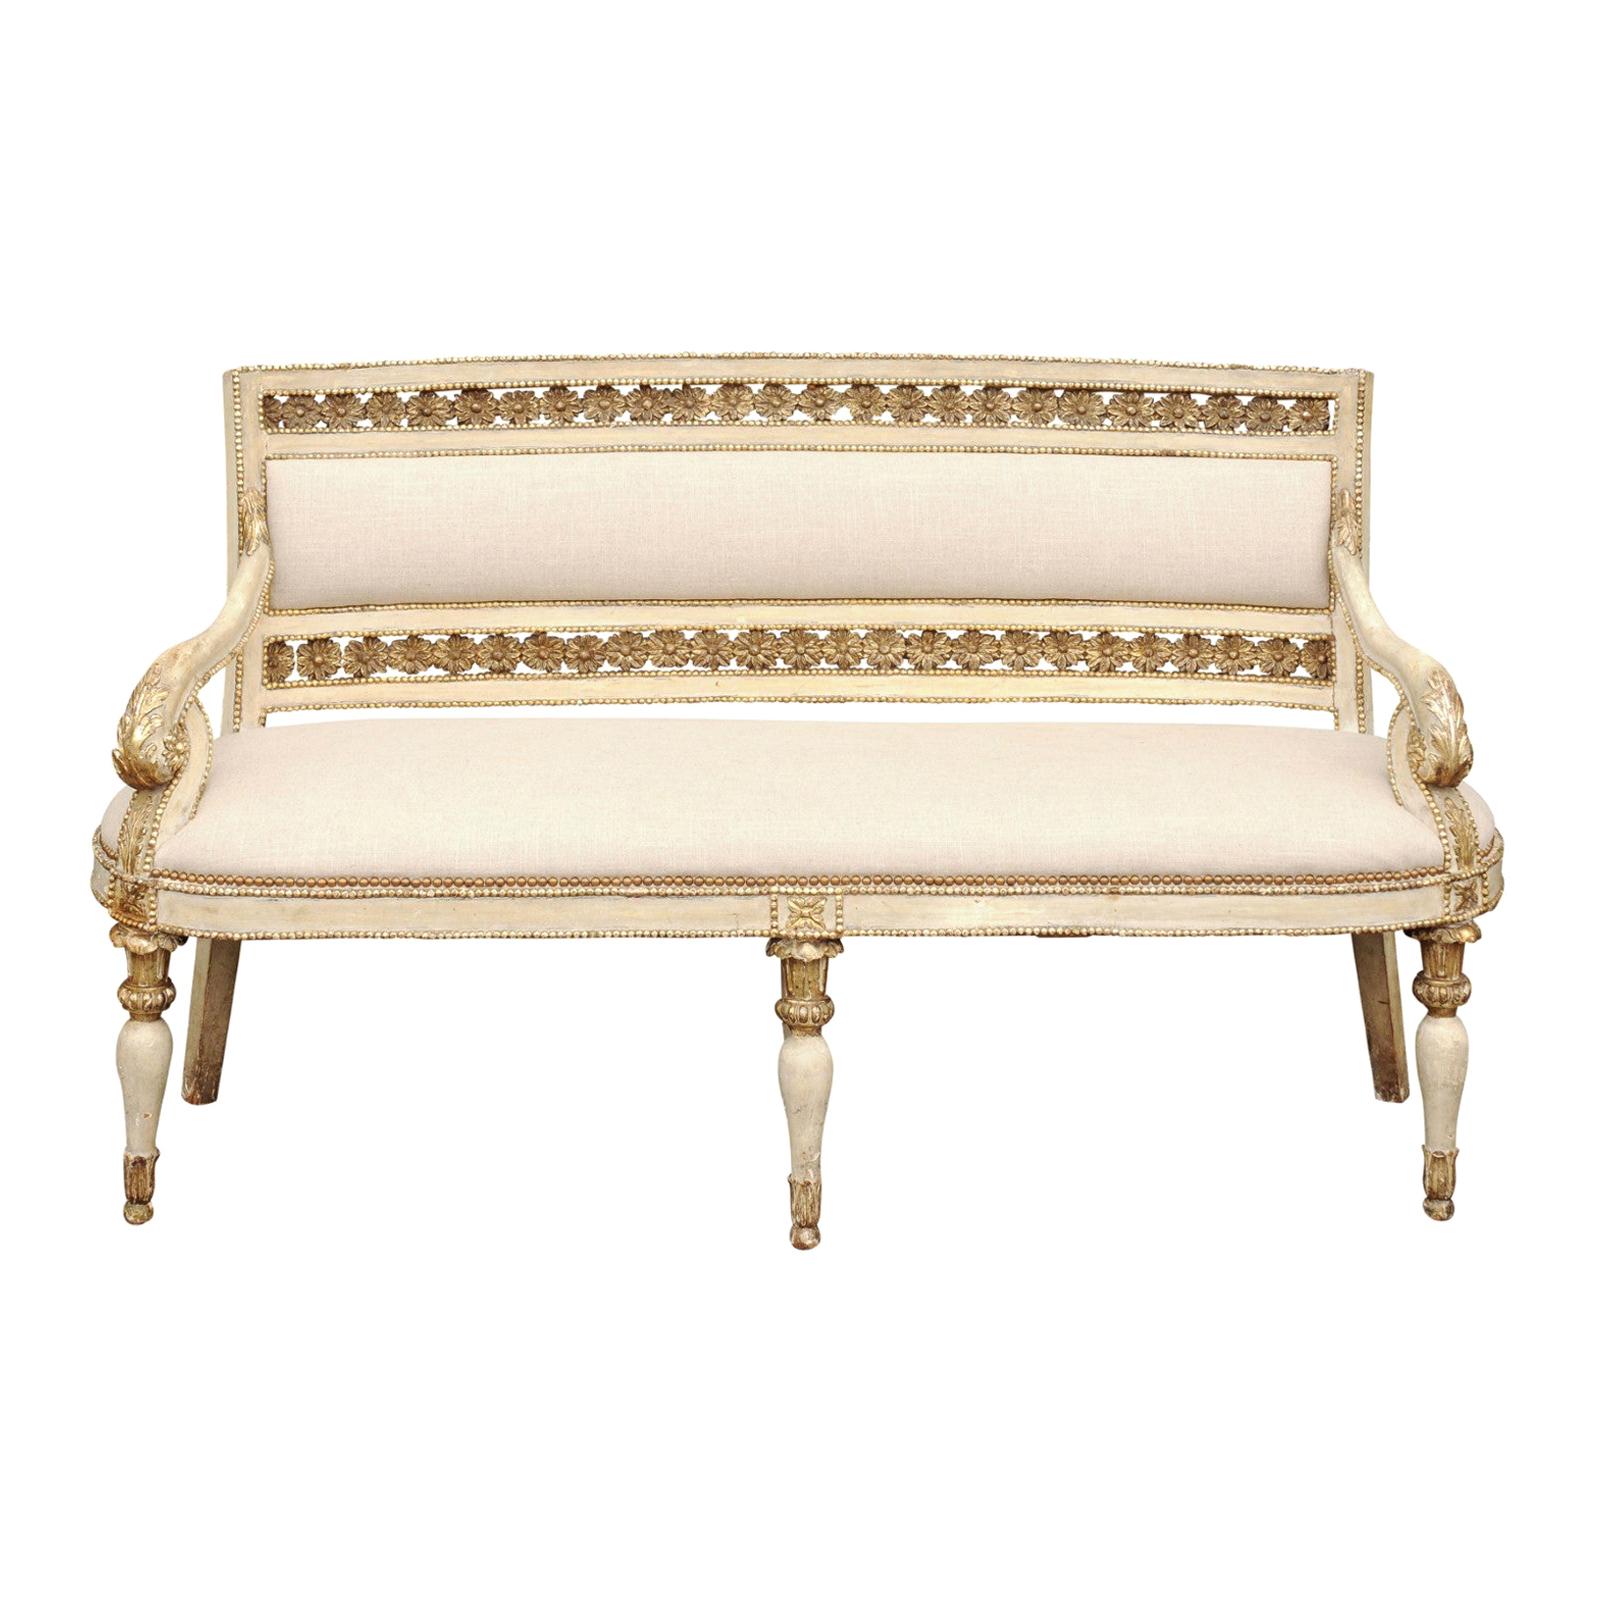 Italian Neoclassical 1800s Settee with Original Paint and Gilt Floral Motifs